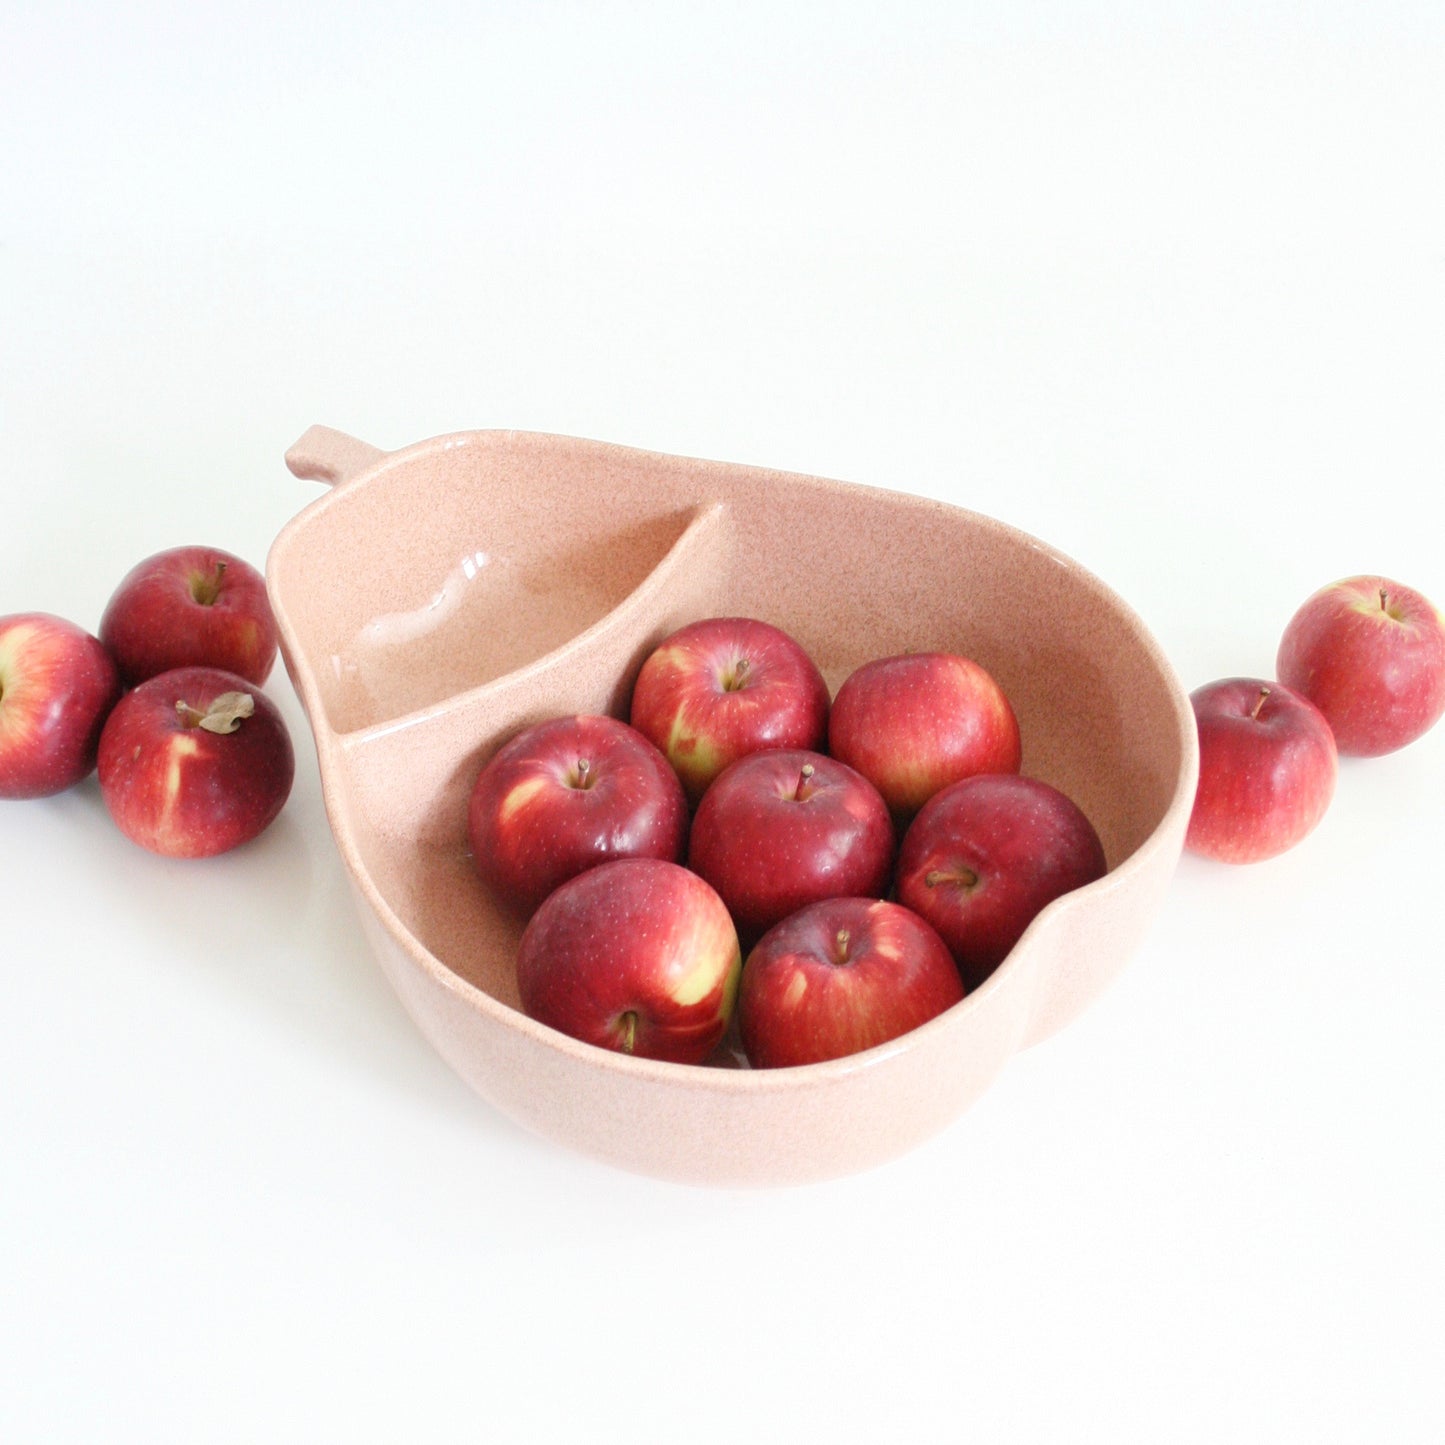 SOLD - Mid Century Pink Ceramic Divided Pear Bowl by Pfaltzgraff